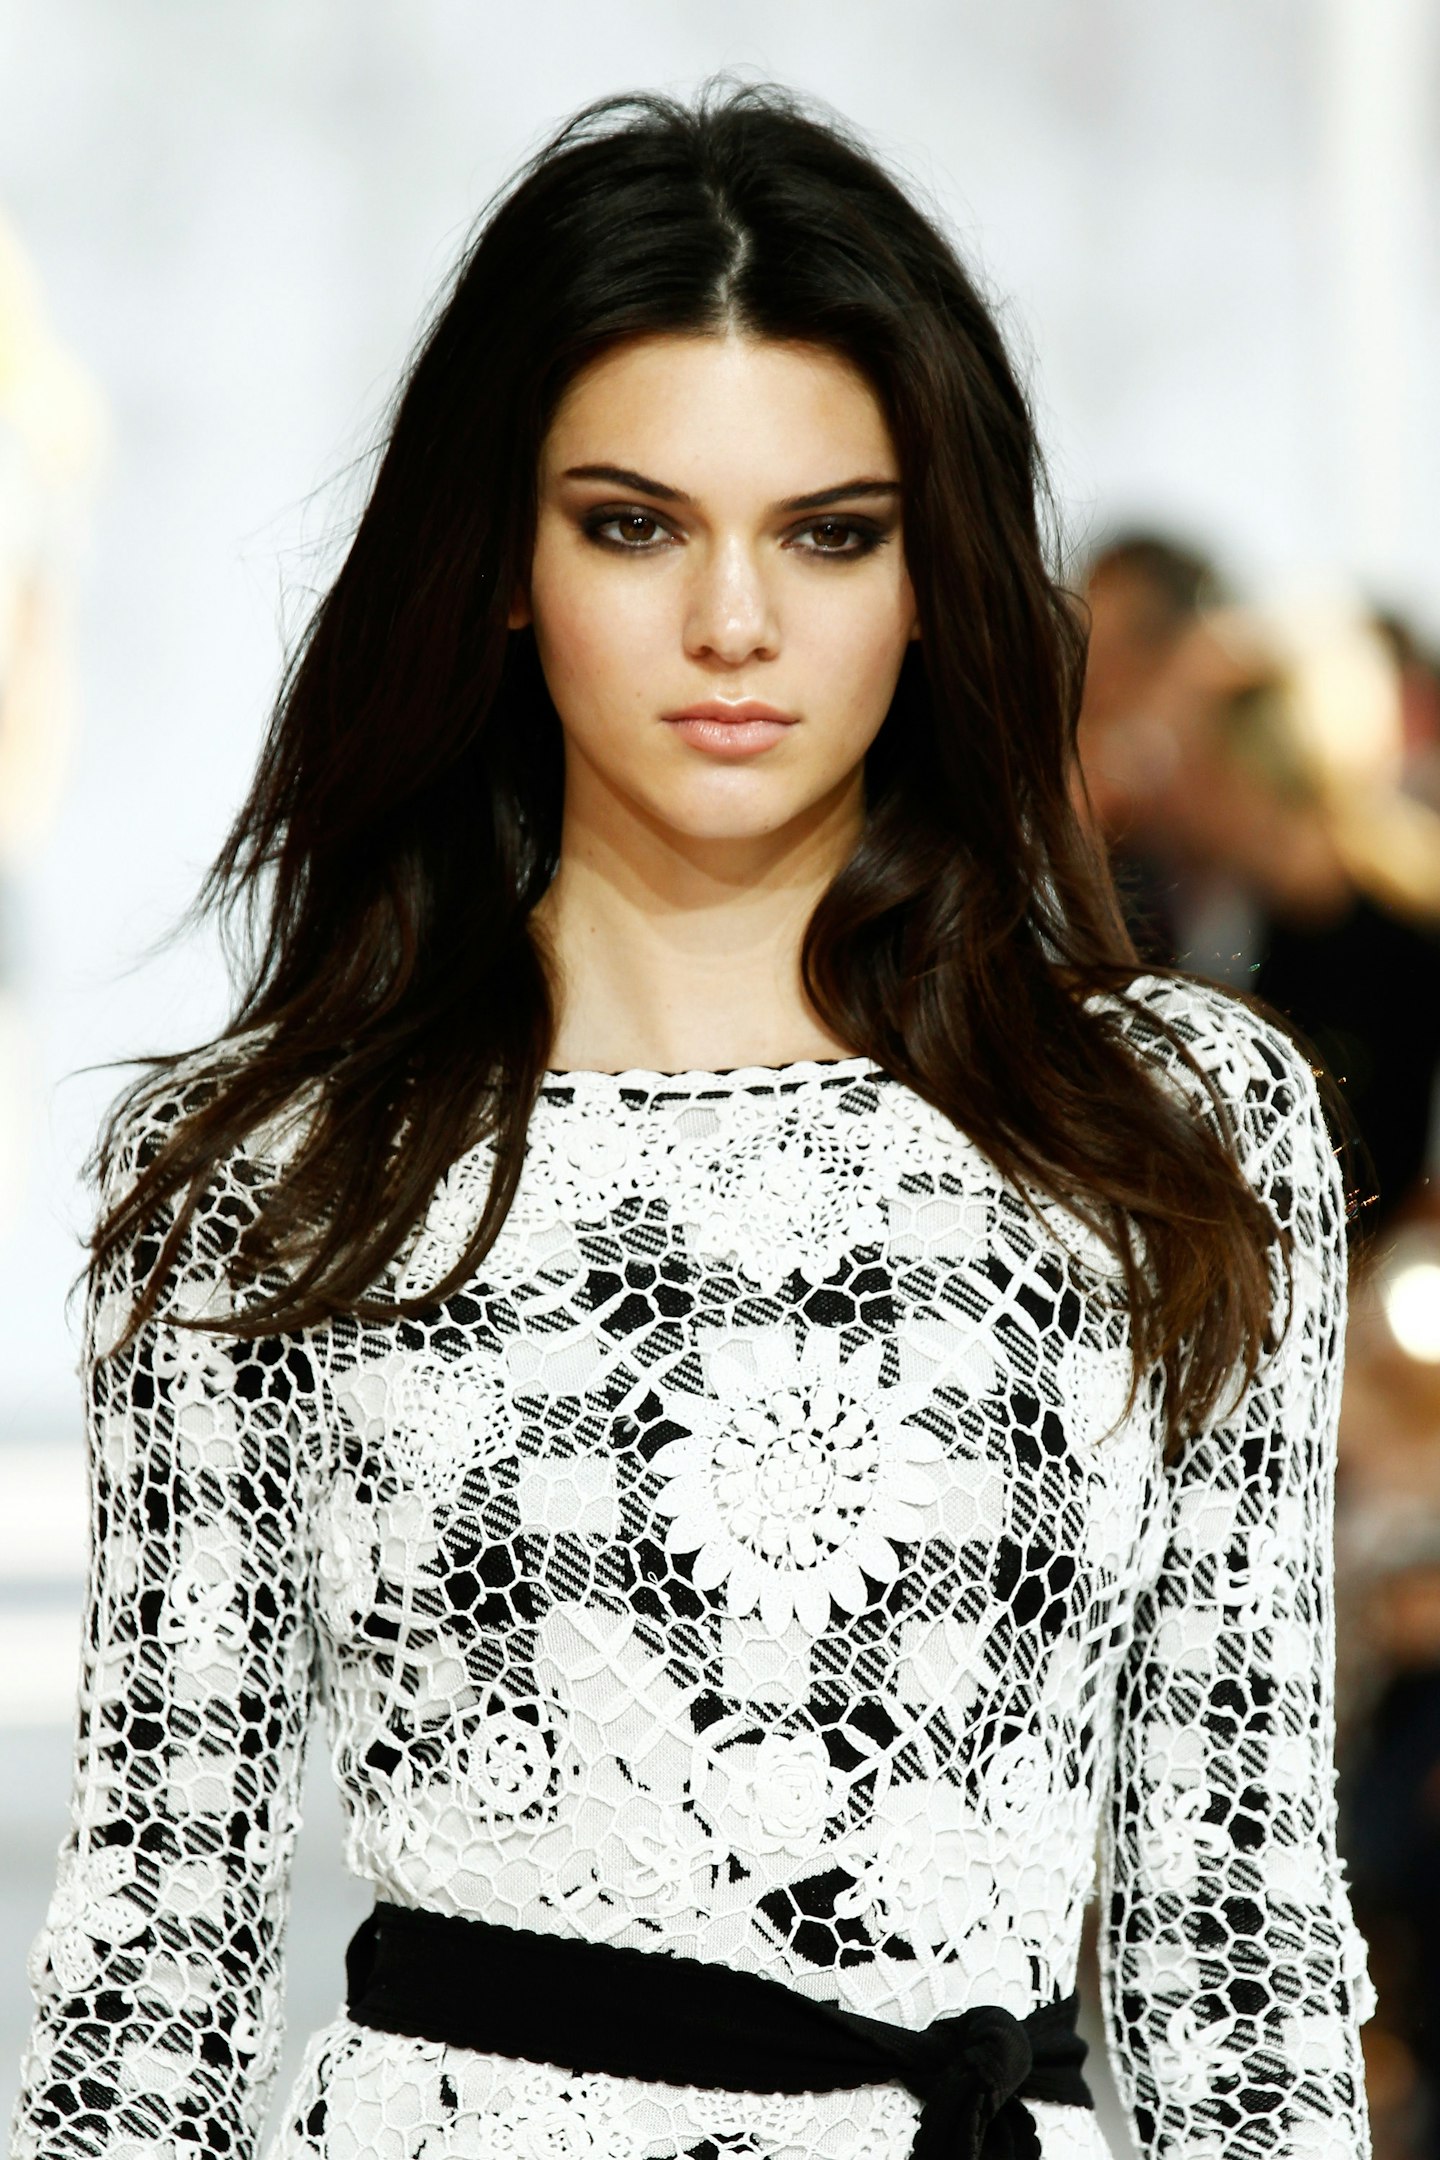 Kendall Jenner 2014 (age 18